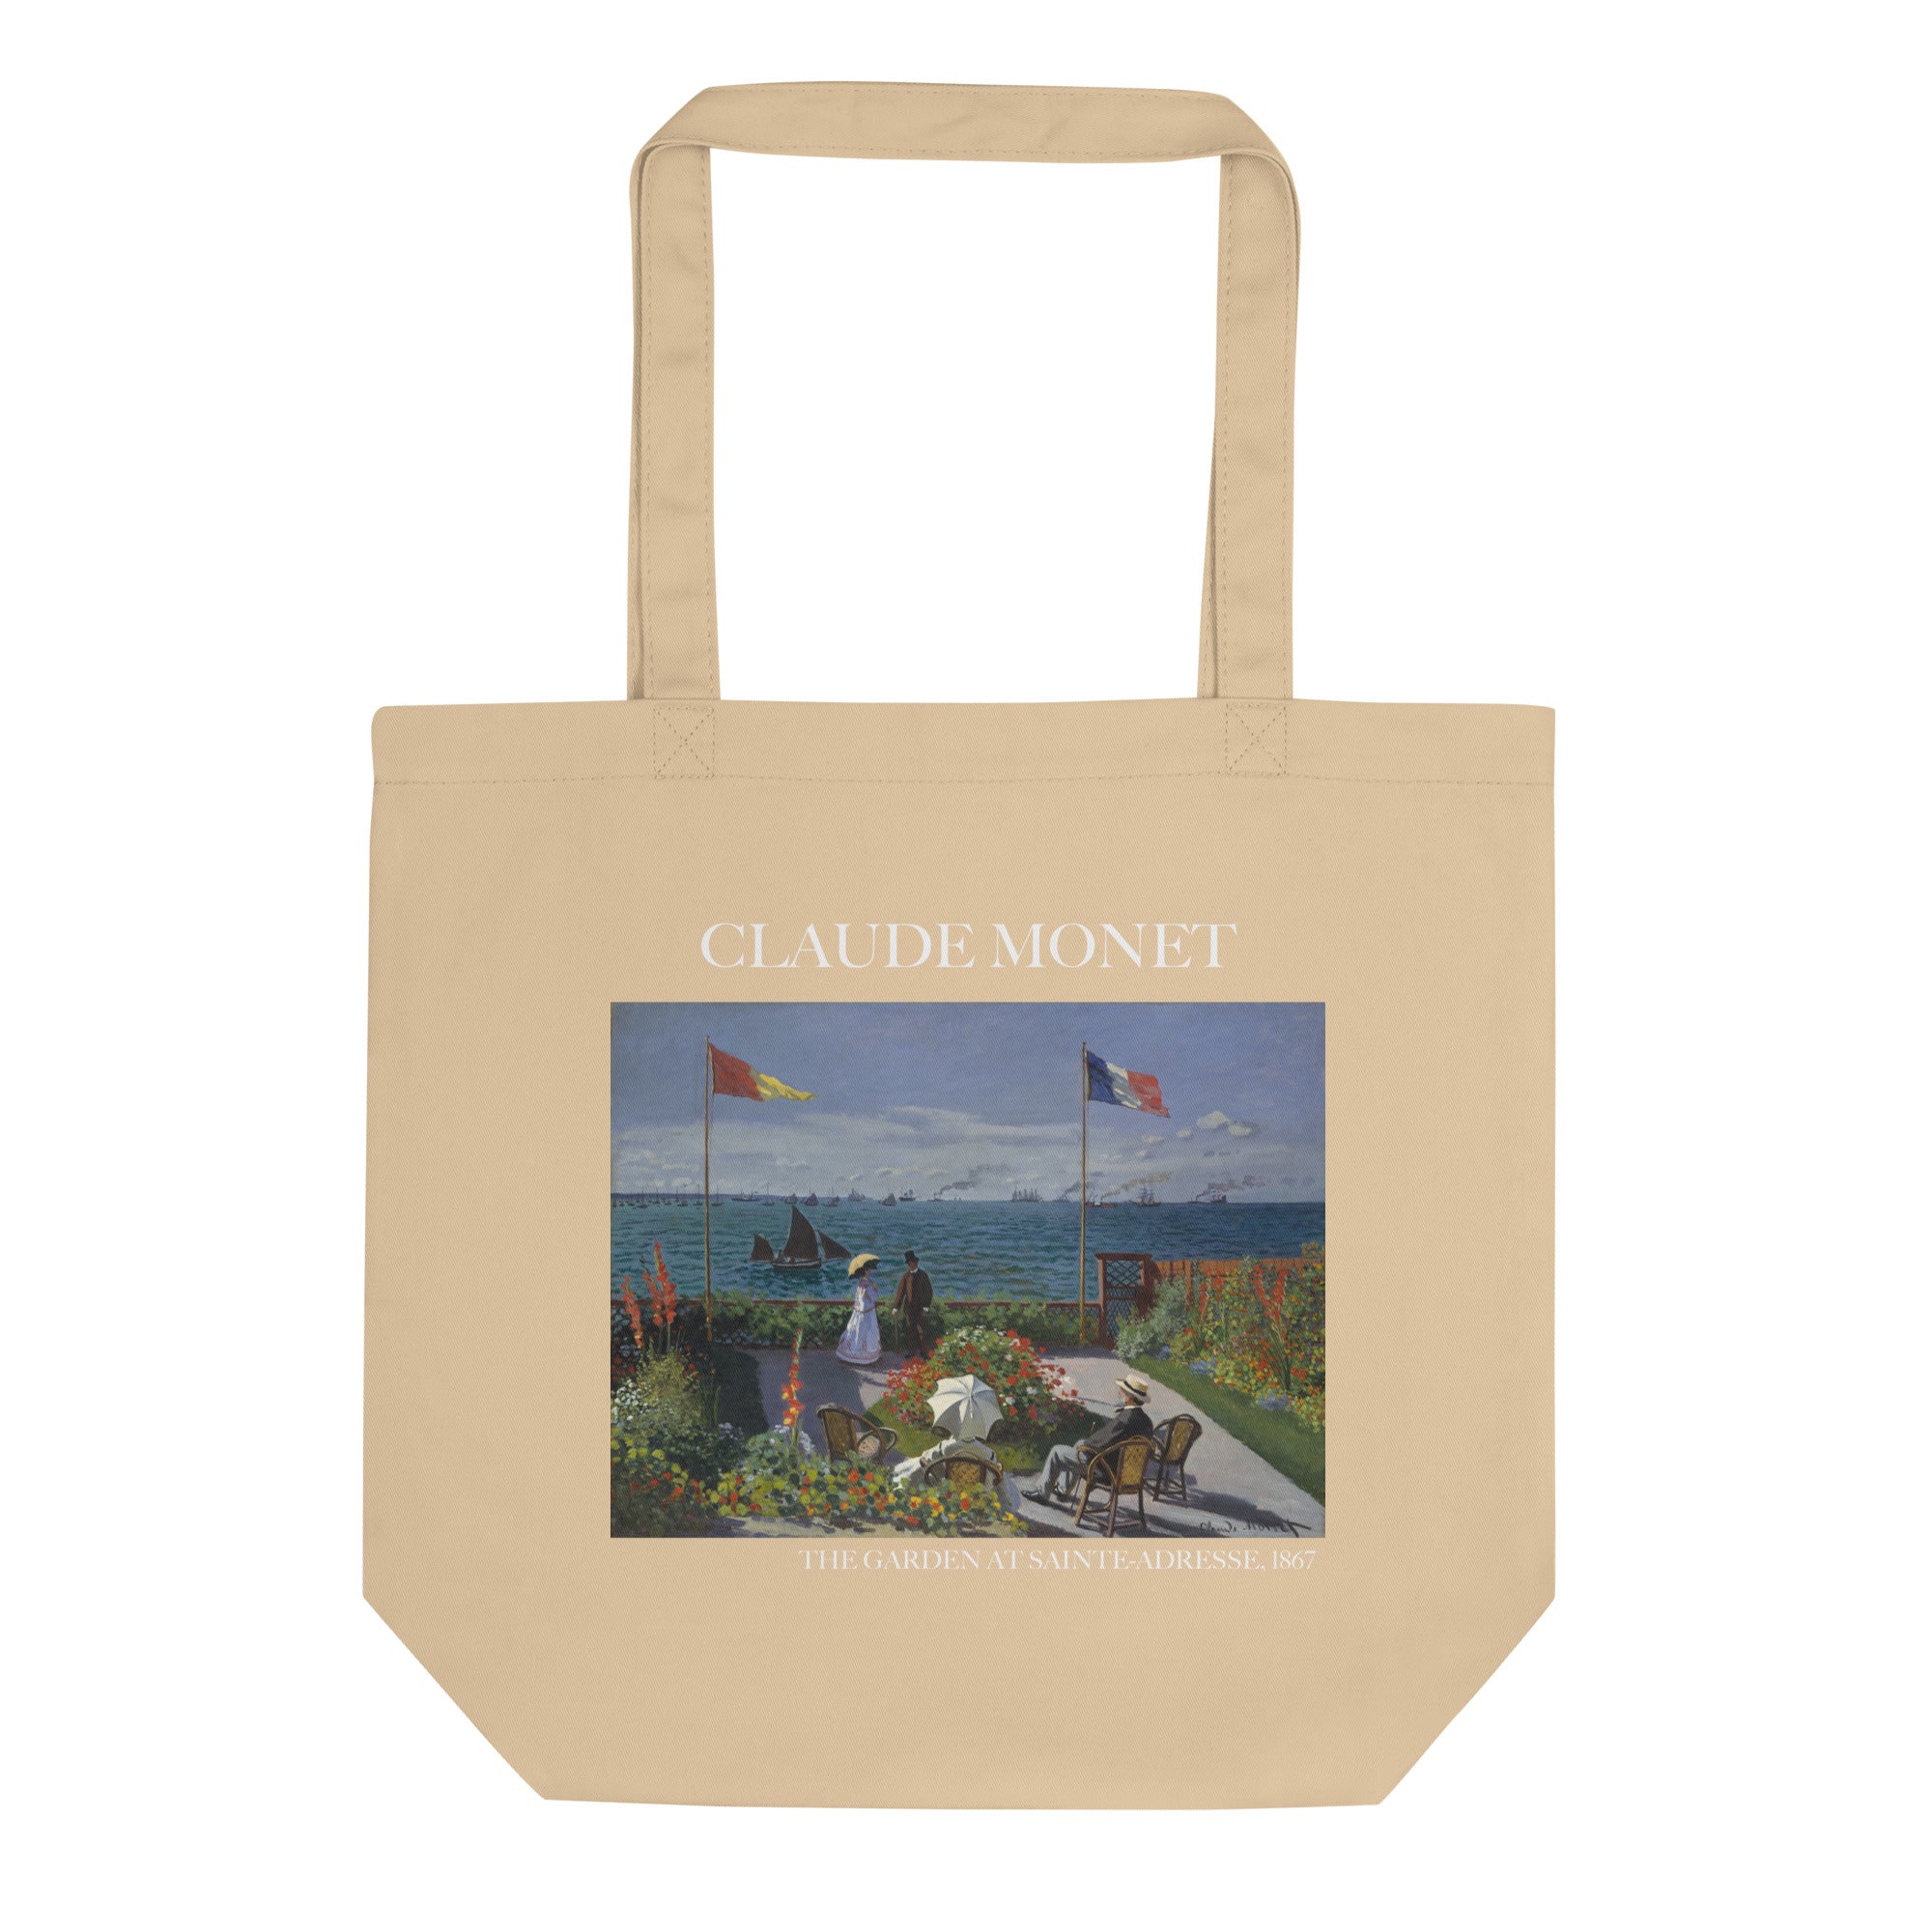 Hieronymus Bosch 'The Garden of Earthly Delights' Famous Painting Totebag | Eco Friendly Art Tote Bag